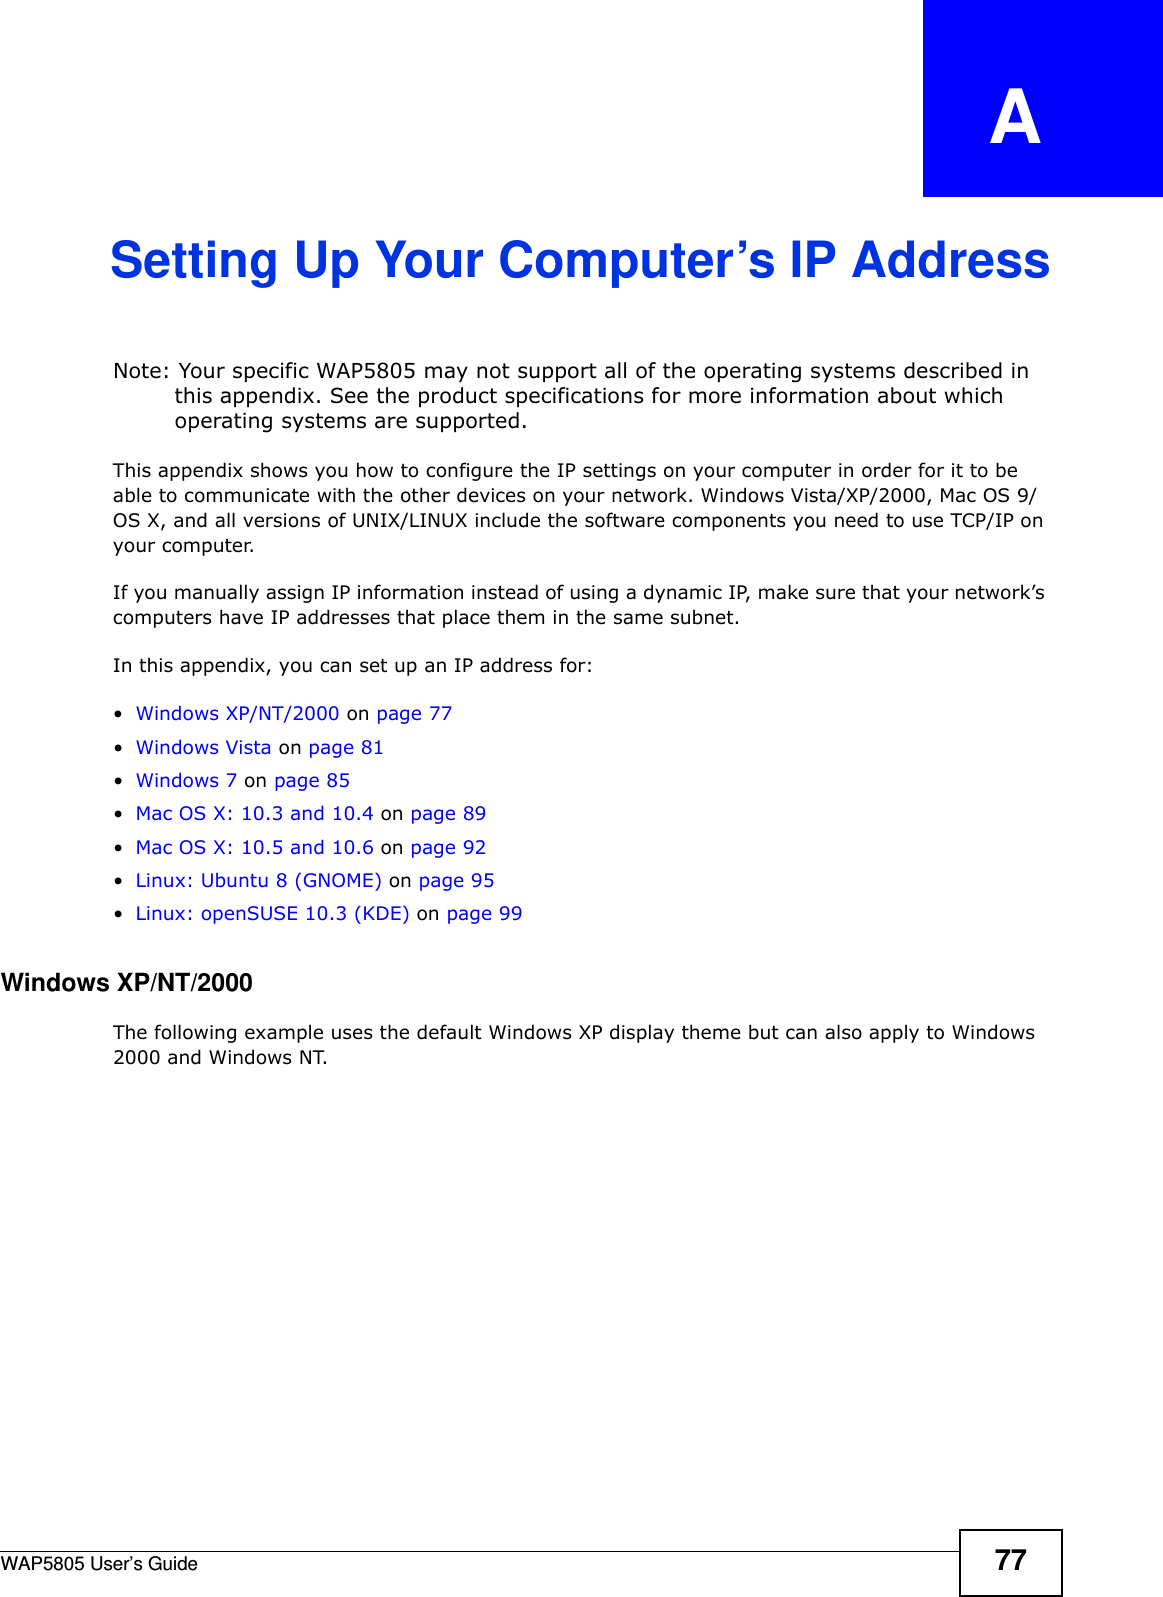 WAP5805 User’s Guide 77APPENDIX   ASetting Up Your Computer’s IP AddressNote: Your specific WAP5805 may not support all of the operating systems described in this appendix. See the product specifications for more information about which operating systems are supported.This appendix shows you how to configure the IP settings on your computer in order for it to be able to communicate with the other devices on your network. Windows Vista/XP/2000, Mac OS 9/OS X, and all versions of UNIX/LINUX include the software components you need to use TCP/IP on your computer. If you manually assign IP information instead of using a dynamic IP, make sure that your network’s computers have IP addresses that place them in the same subnet.In this appendix, you can set up an IP address for:•Windows XP/NT/2000 on page 77•Windows Vista on page 81•Windows 7 on page 85•Mac OS X: 10.3 and 10.4 on page 89•Mac OS X: 10.5 and 10.6 on page 92•Linux: Ubuntu 8 (GNOME) on page 95•Linux: openSUSE 10.3 (KDE) on page 99Windows XP/NT/2000The following example uses the default Windows XP display theme but can also apply to Windows 2000 and Windows NT.